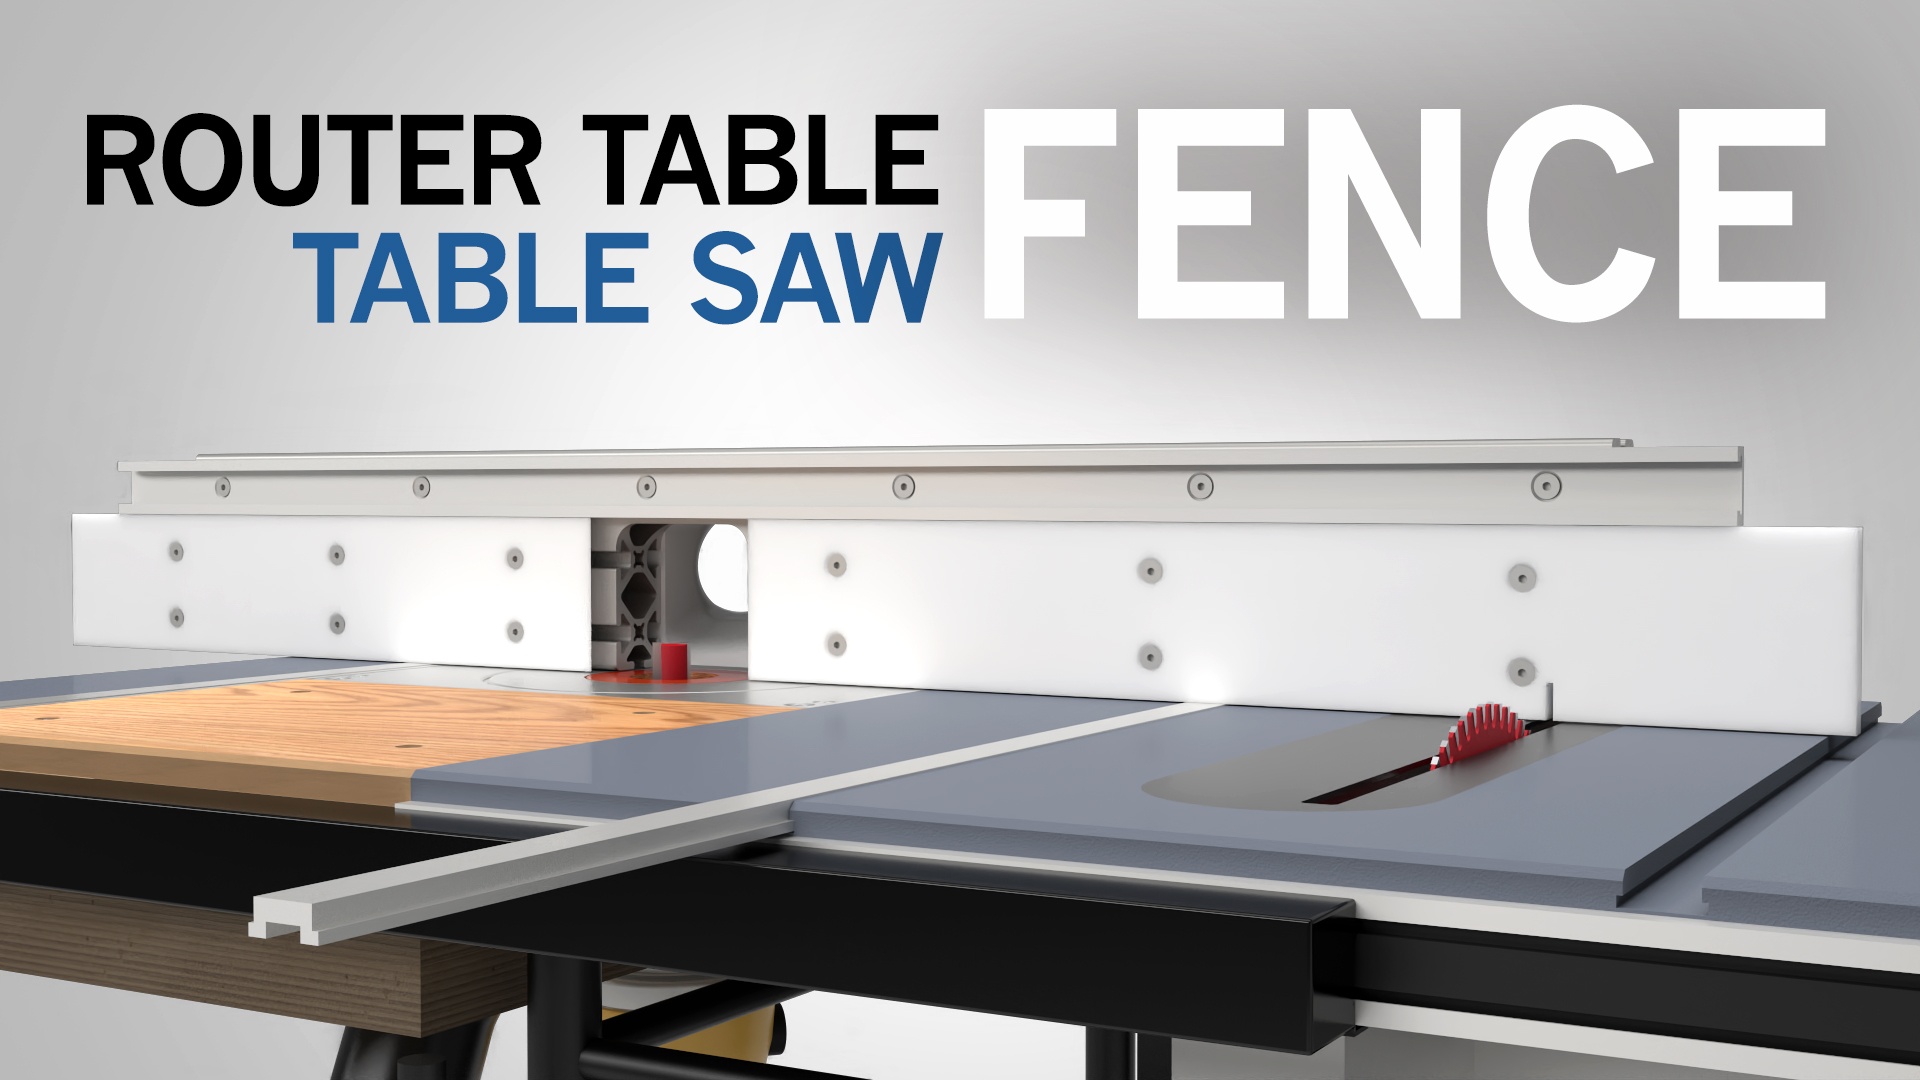 Portable Table Saw with Router Table and Fence Upgrade